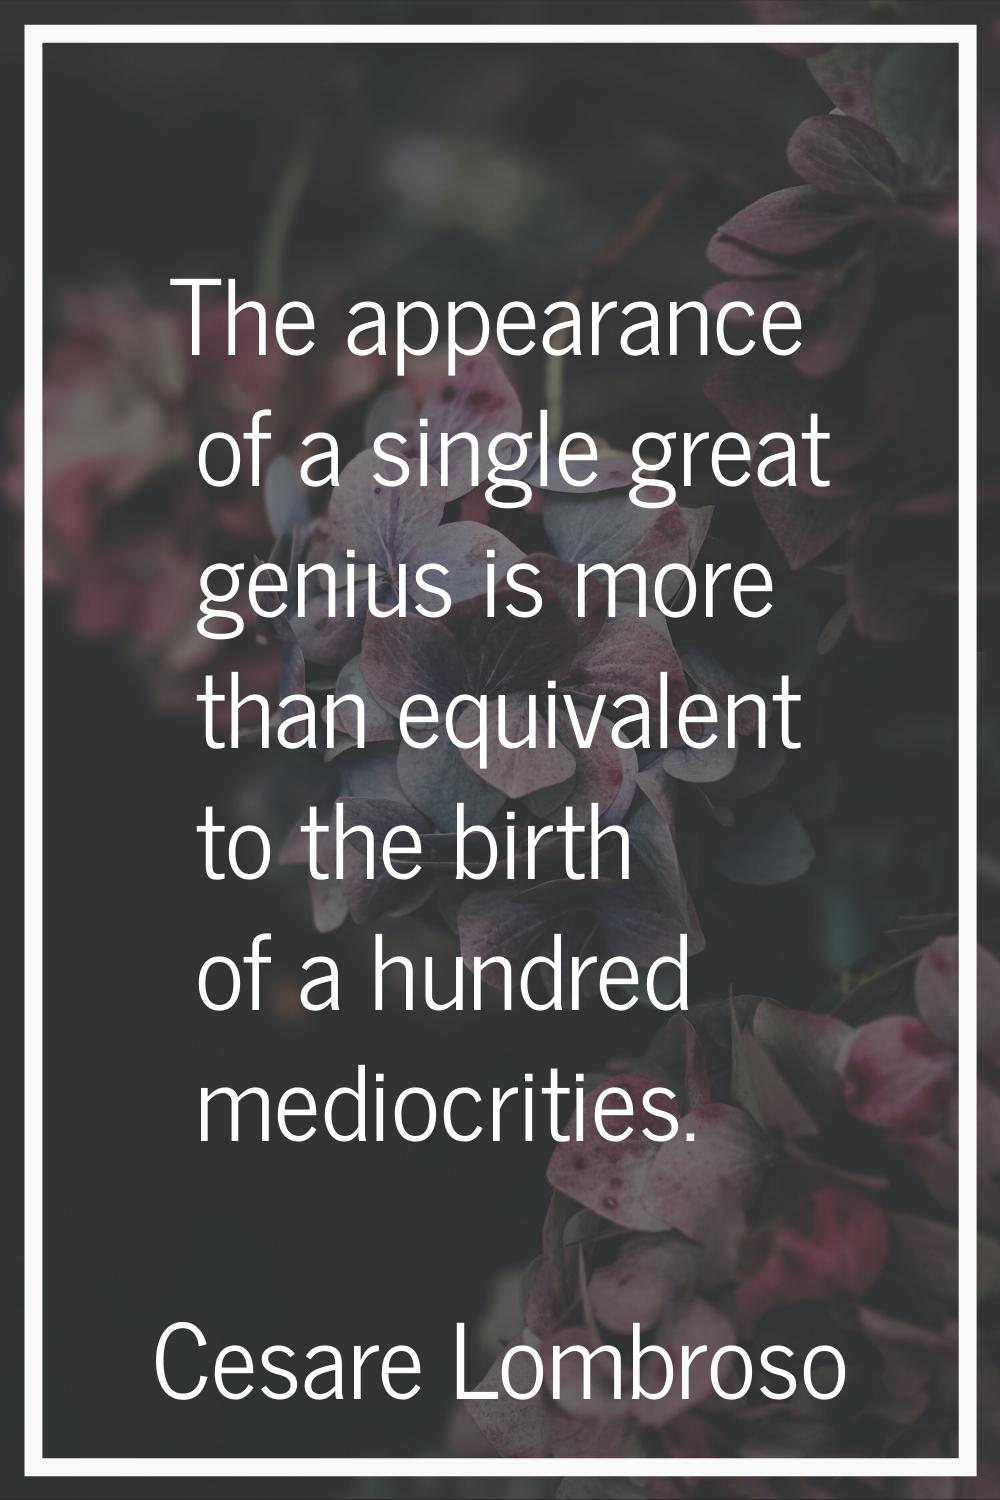 The appearance of a single great genius is more than equivalent to the birth of a hundred mediocrit